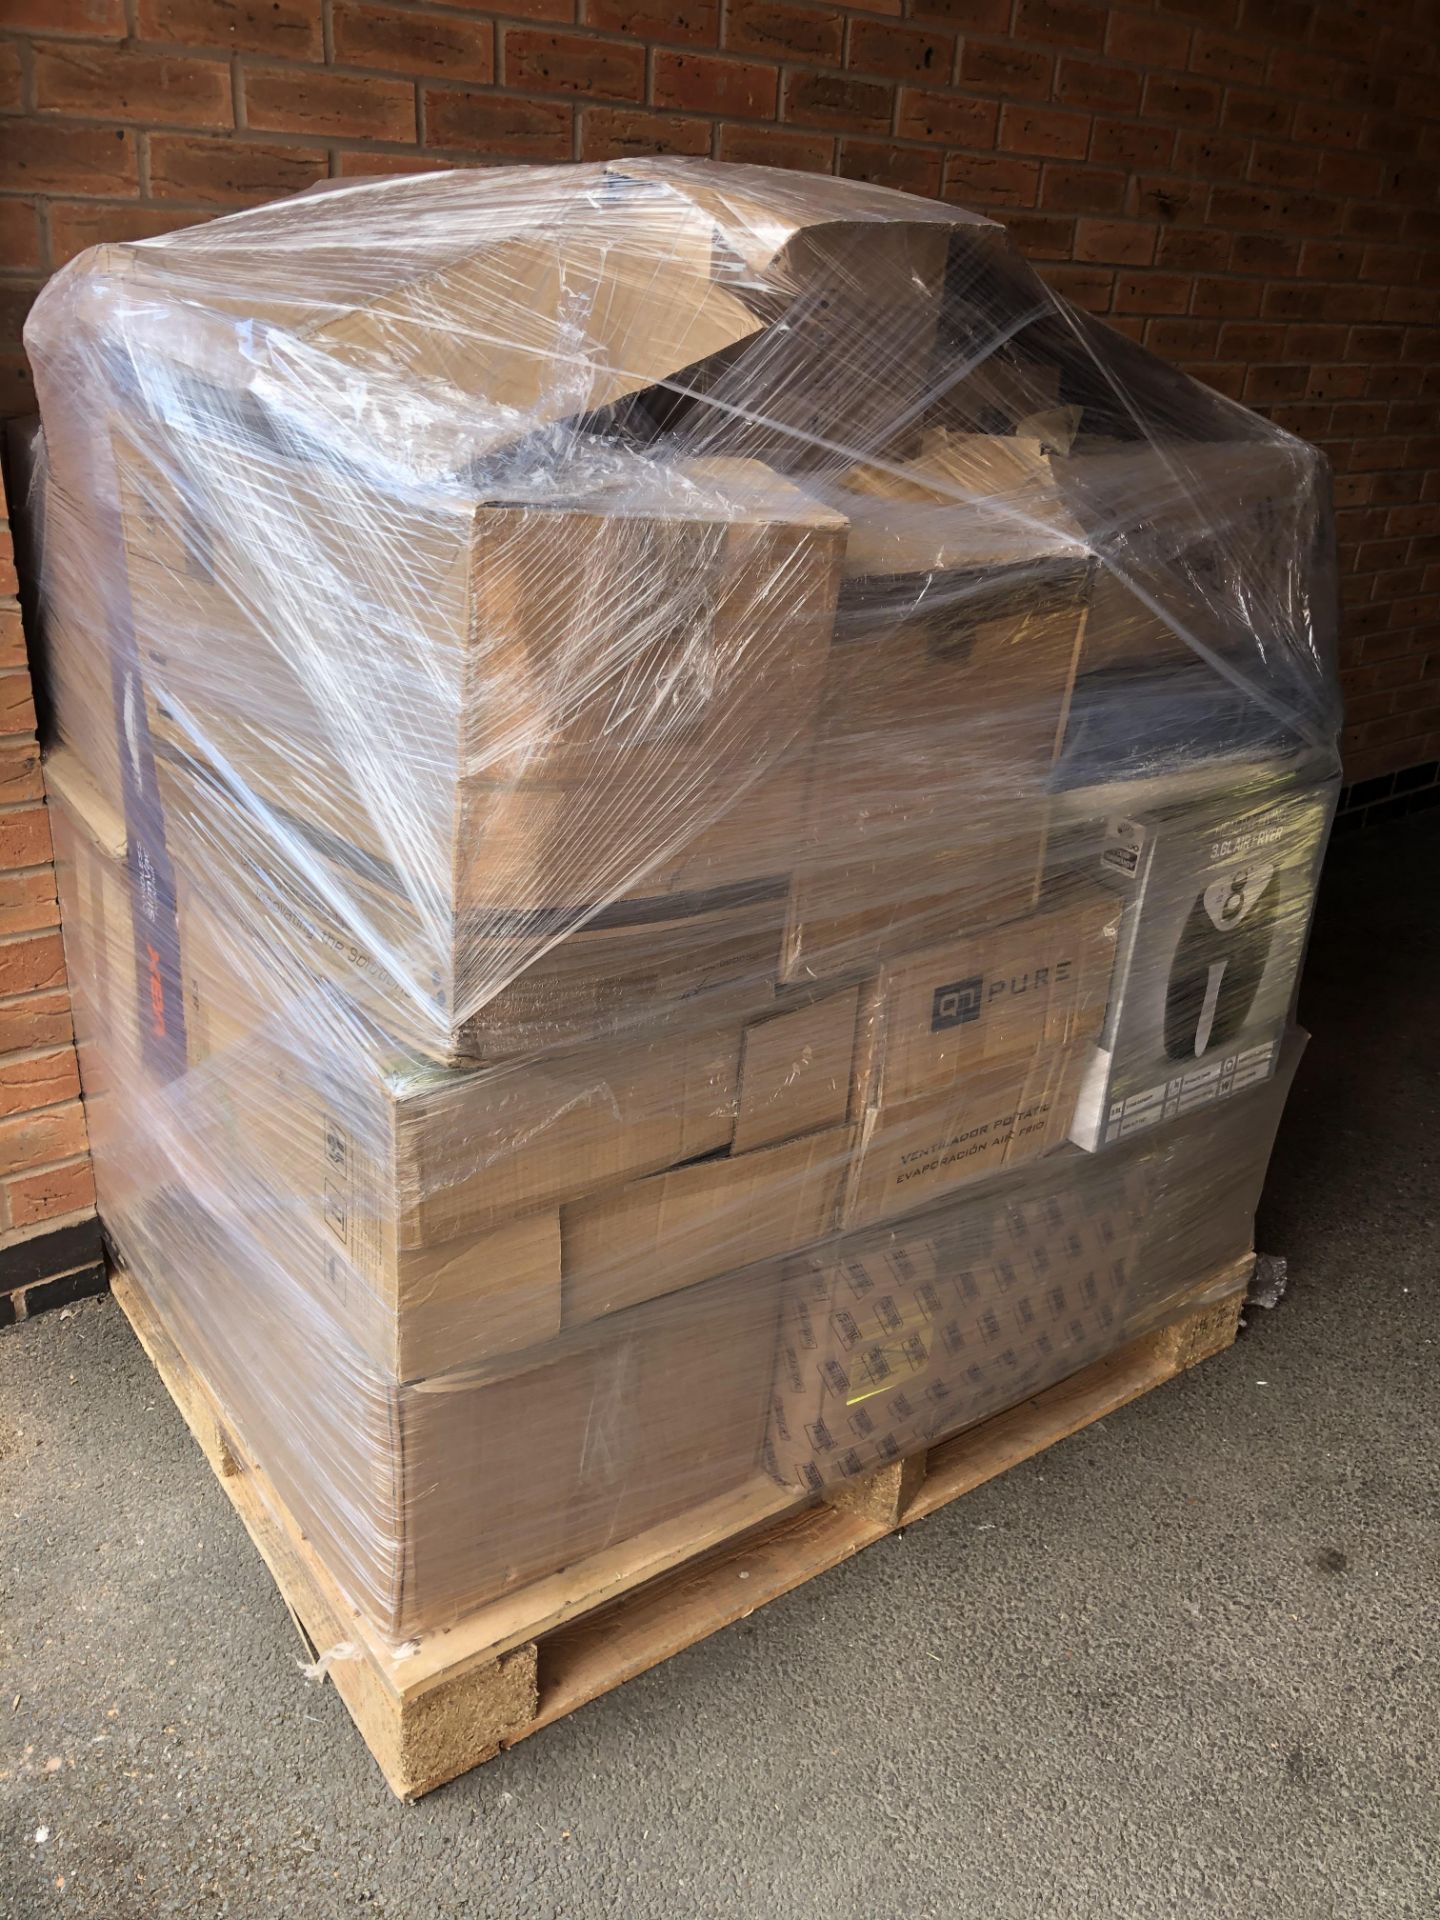 1 Pallet Of Raw Customer Returns Small Electrical's/Domestic Appliances - Image 8 of 8